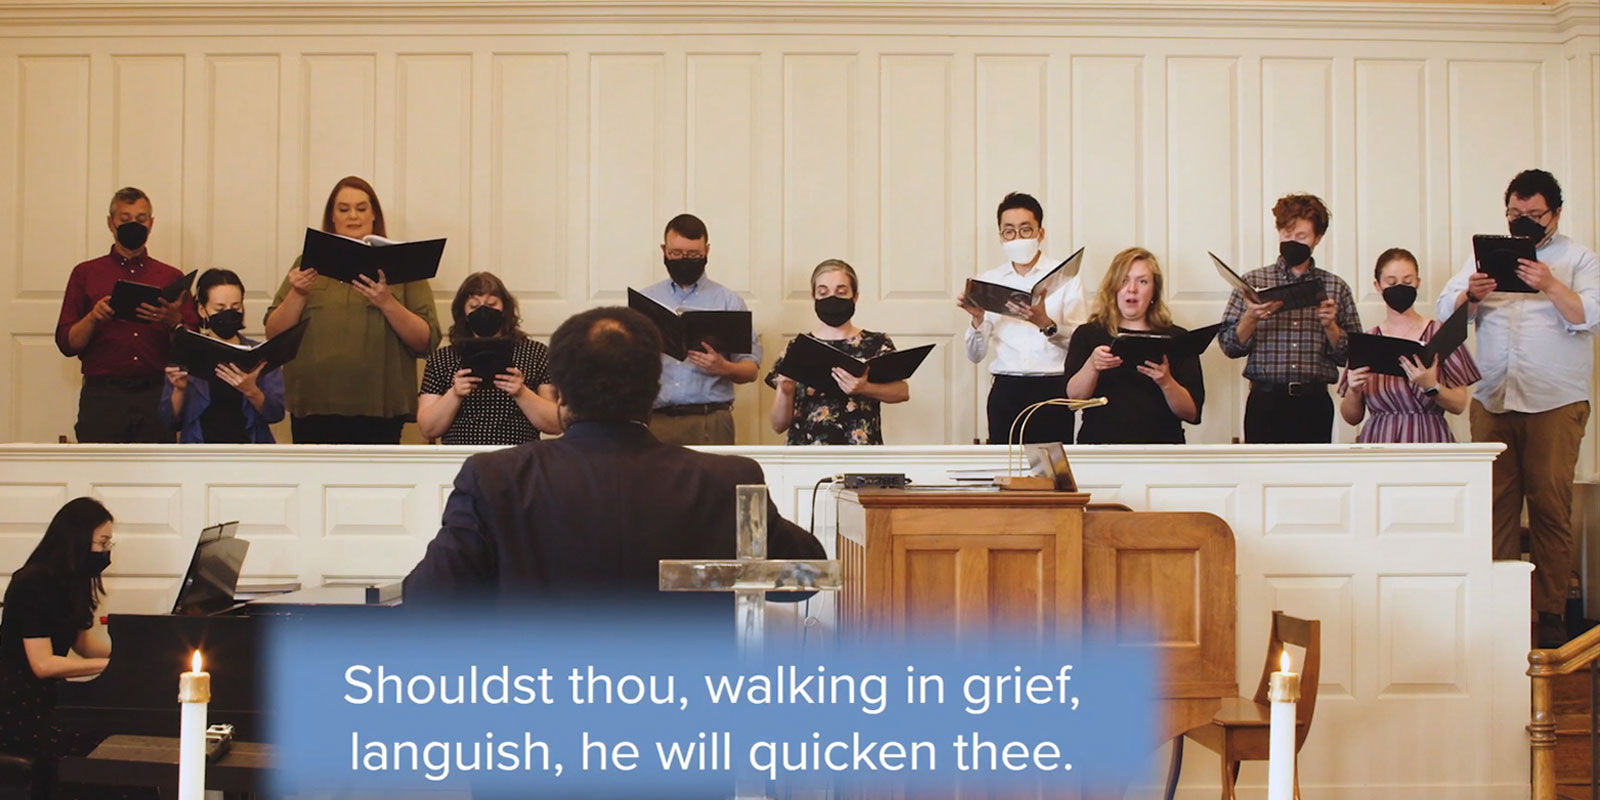 Phillip Morgan and musicians from Mid-Kentucky Presbytery performed “Guide Me O Thou Jehovah” during worship on July 8, 2022, at the 225th General Assembly for the Presbyterian Church (U.S.A.).